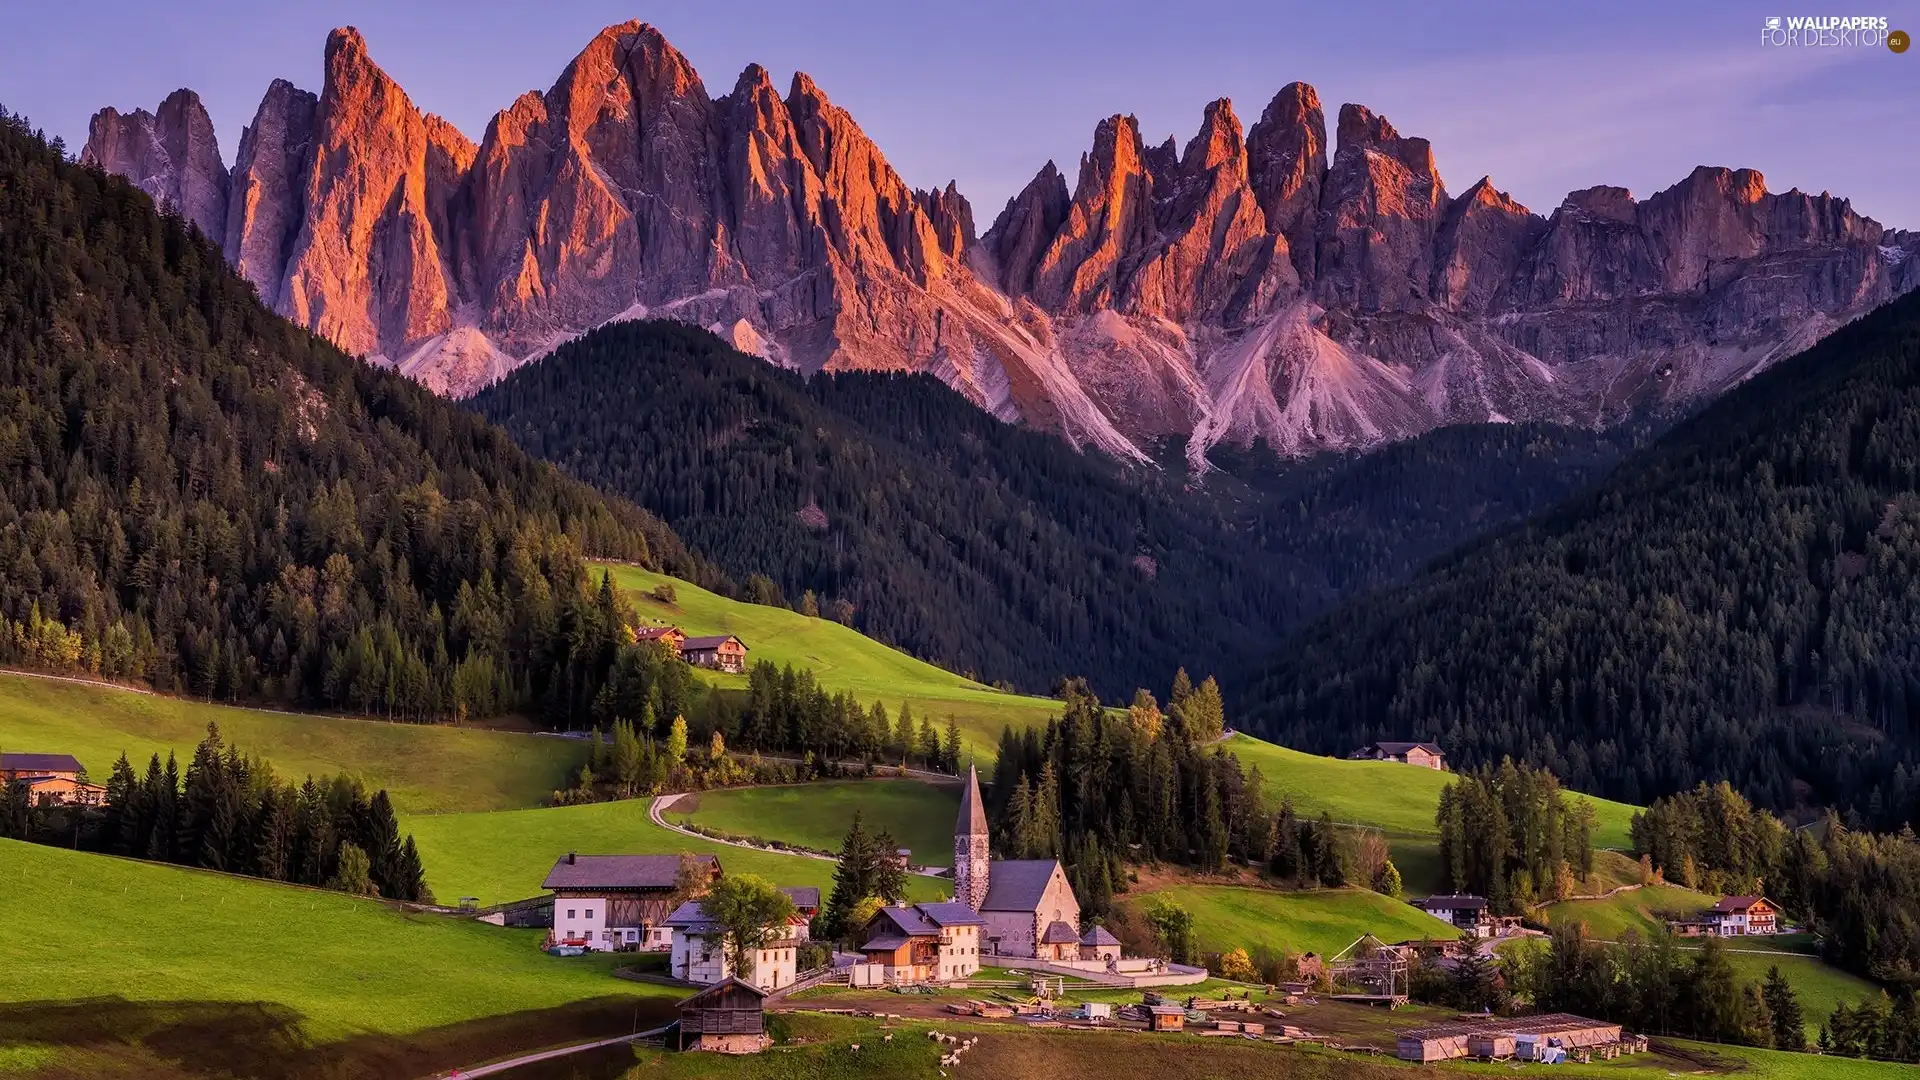 Village of Santa Maddalena, Italy, Church, Houses, Massif Odle, viewes, trees, Val di Funes Valley, Dolomites, forest, Mountains